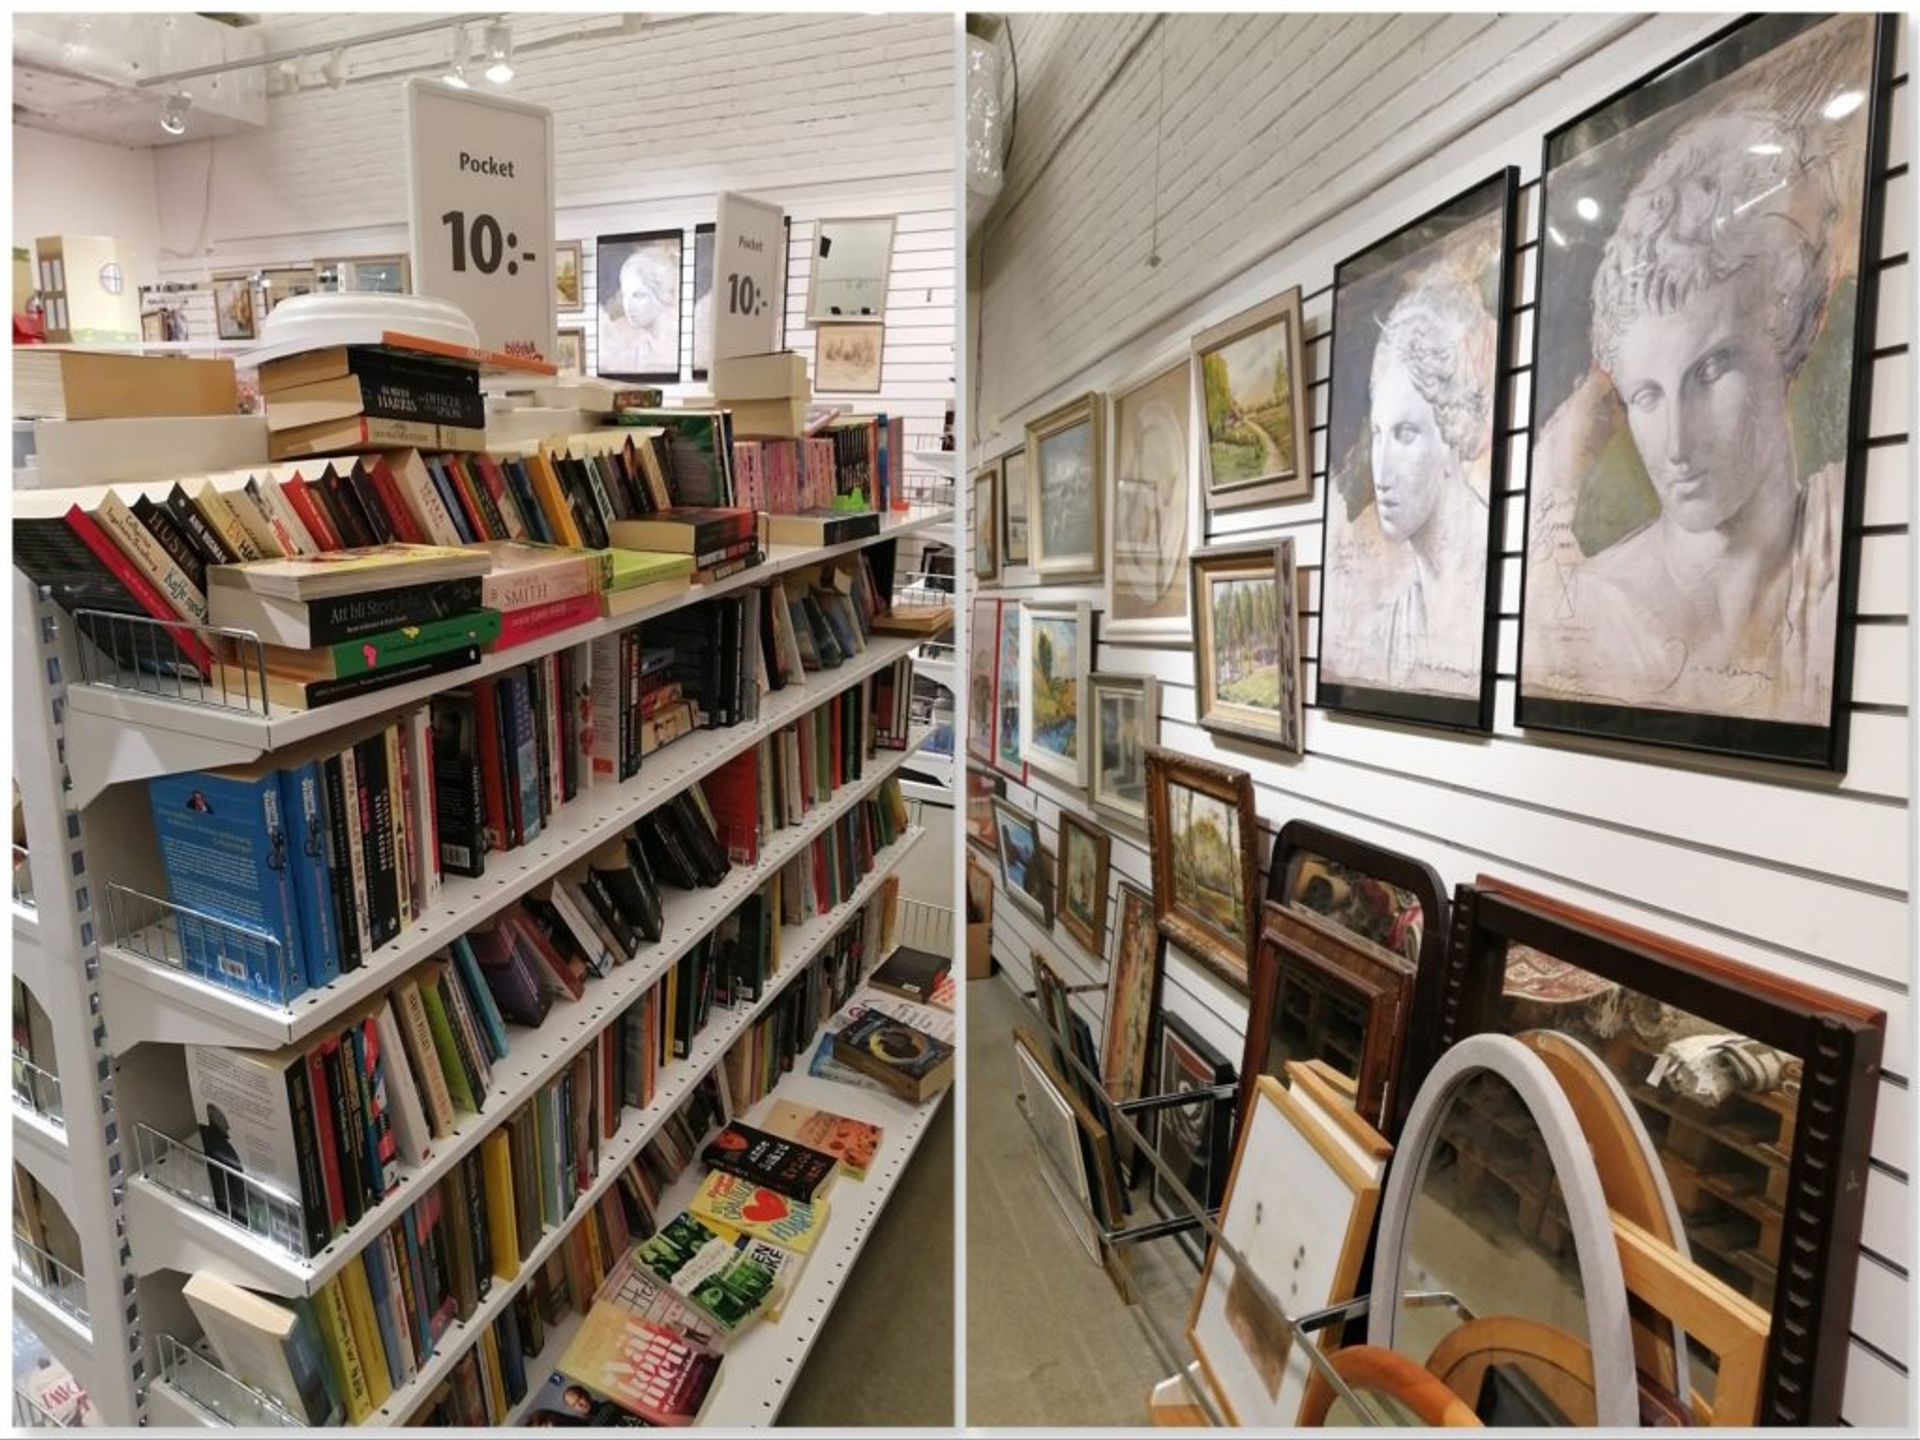 Shelves of books, paintings and mirrors.